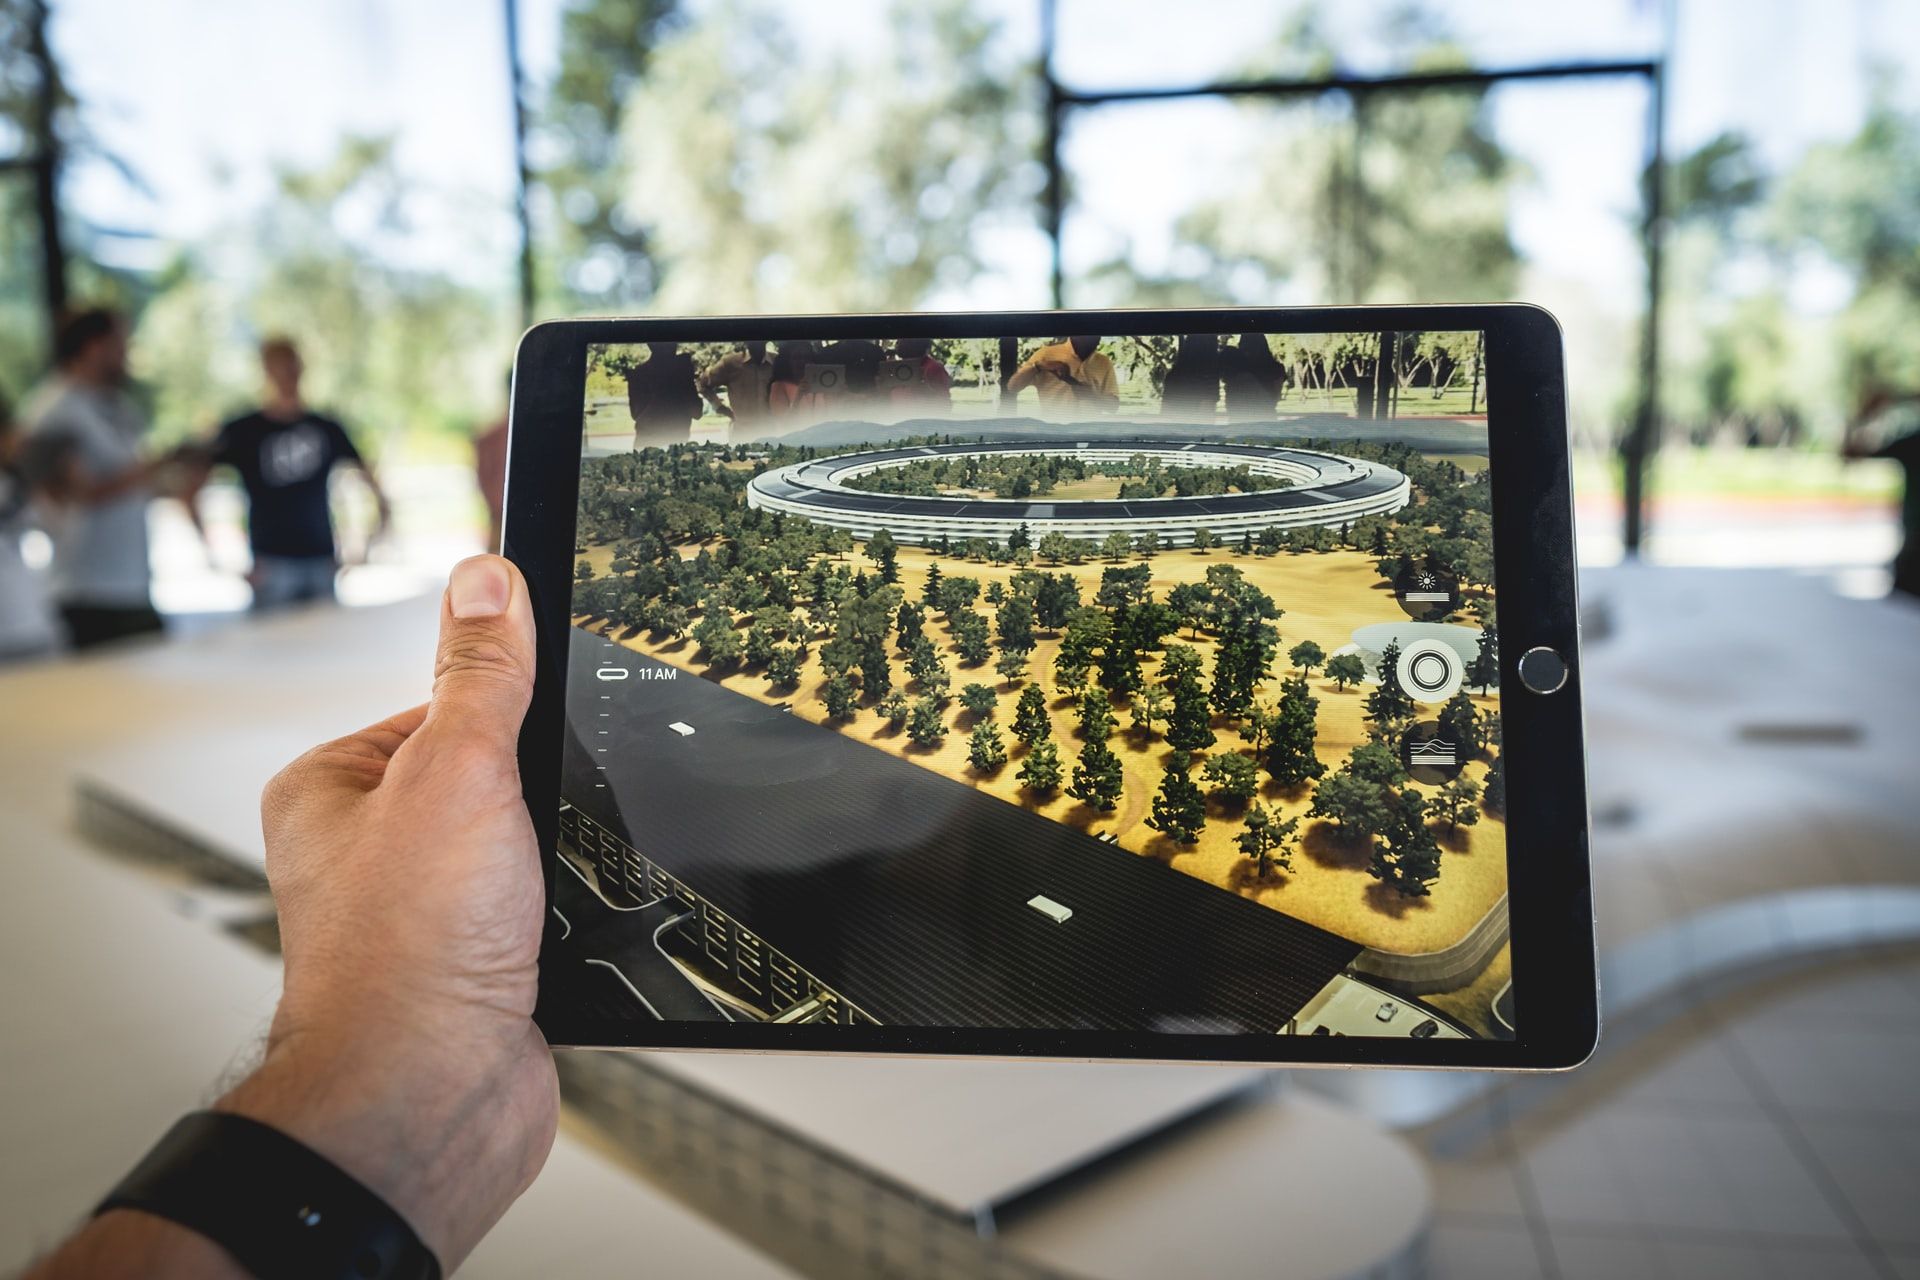 AR Display of Park and Building on Tablet